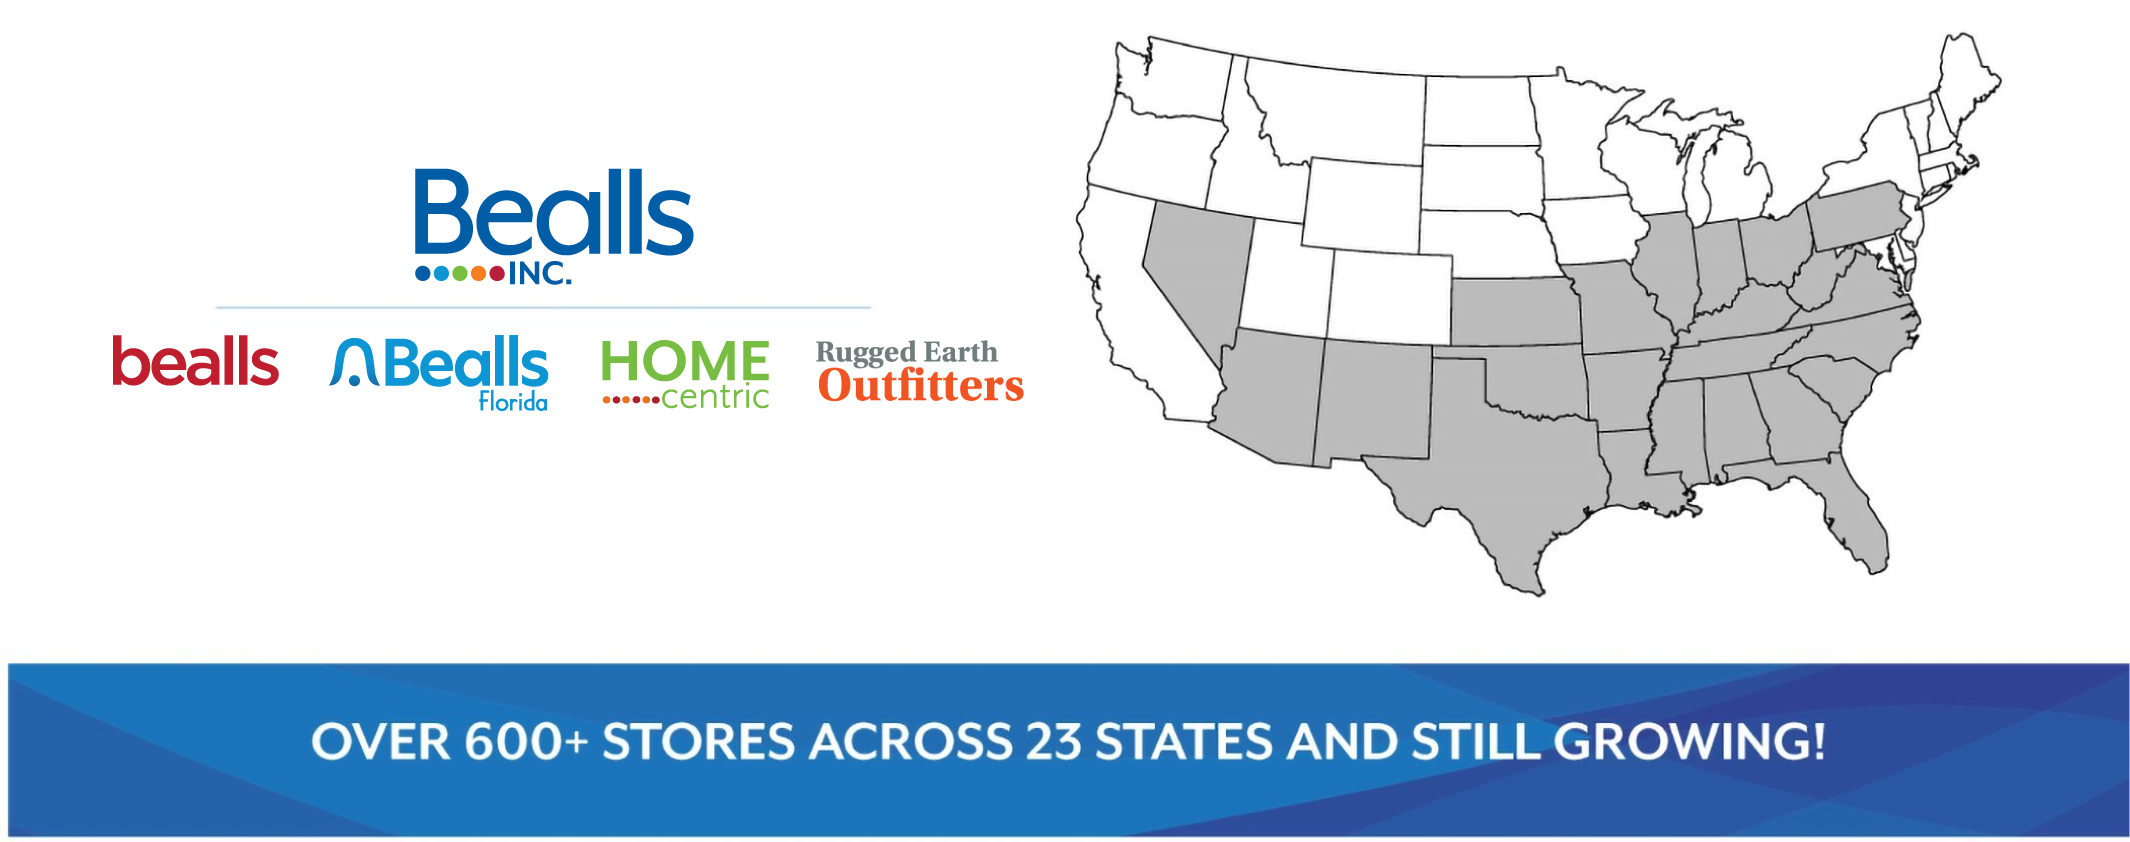 Over 600* stores in 23 states and still growing!